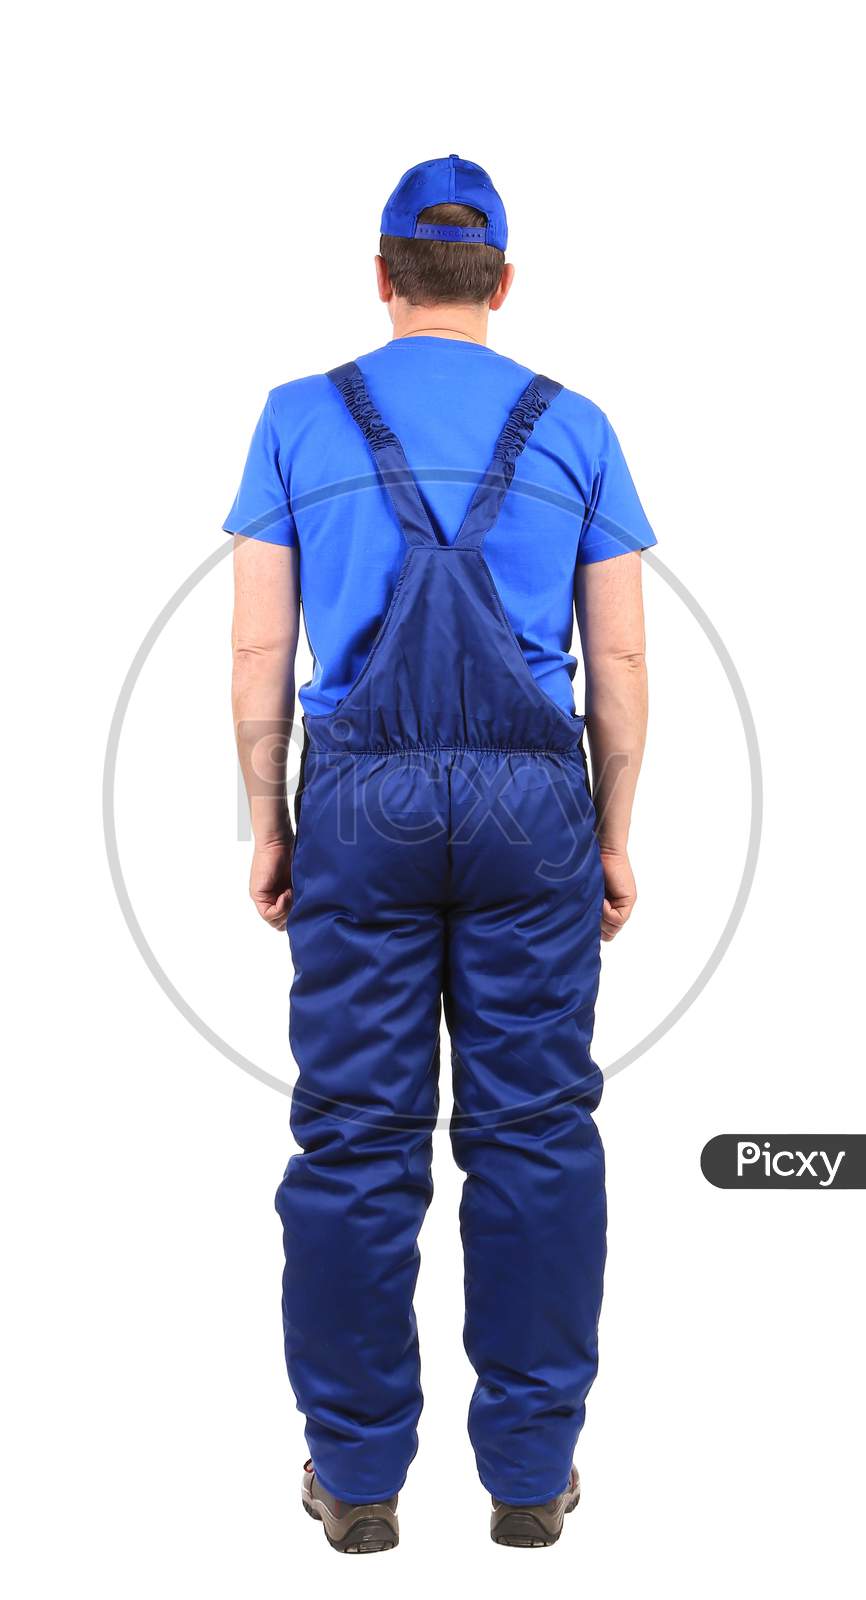 Worker In Blue Overalls. Back View. Isolated On A White Background.